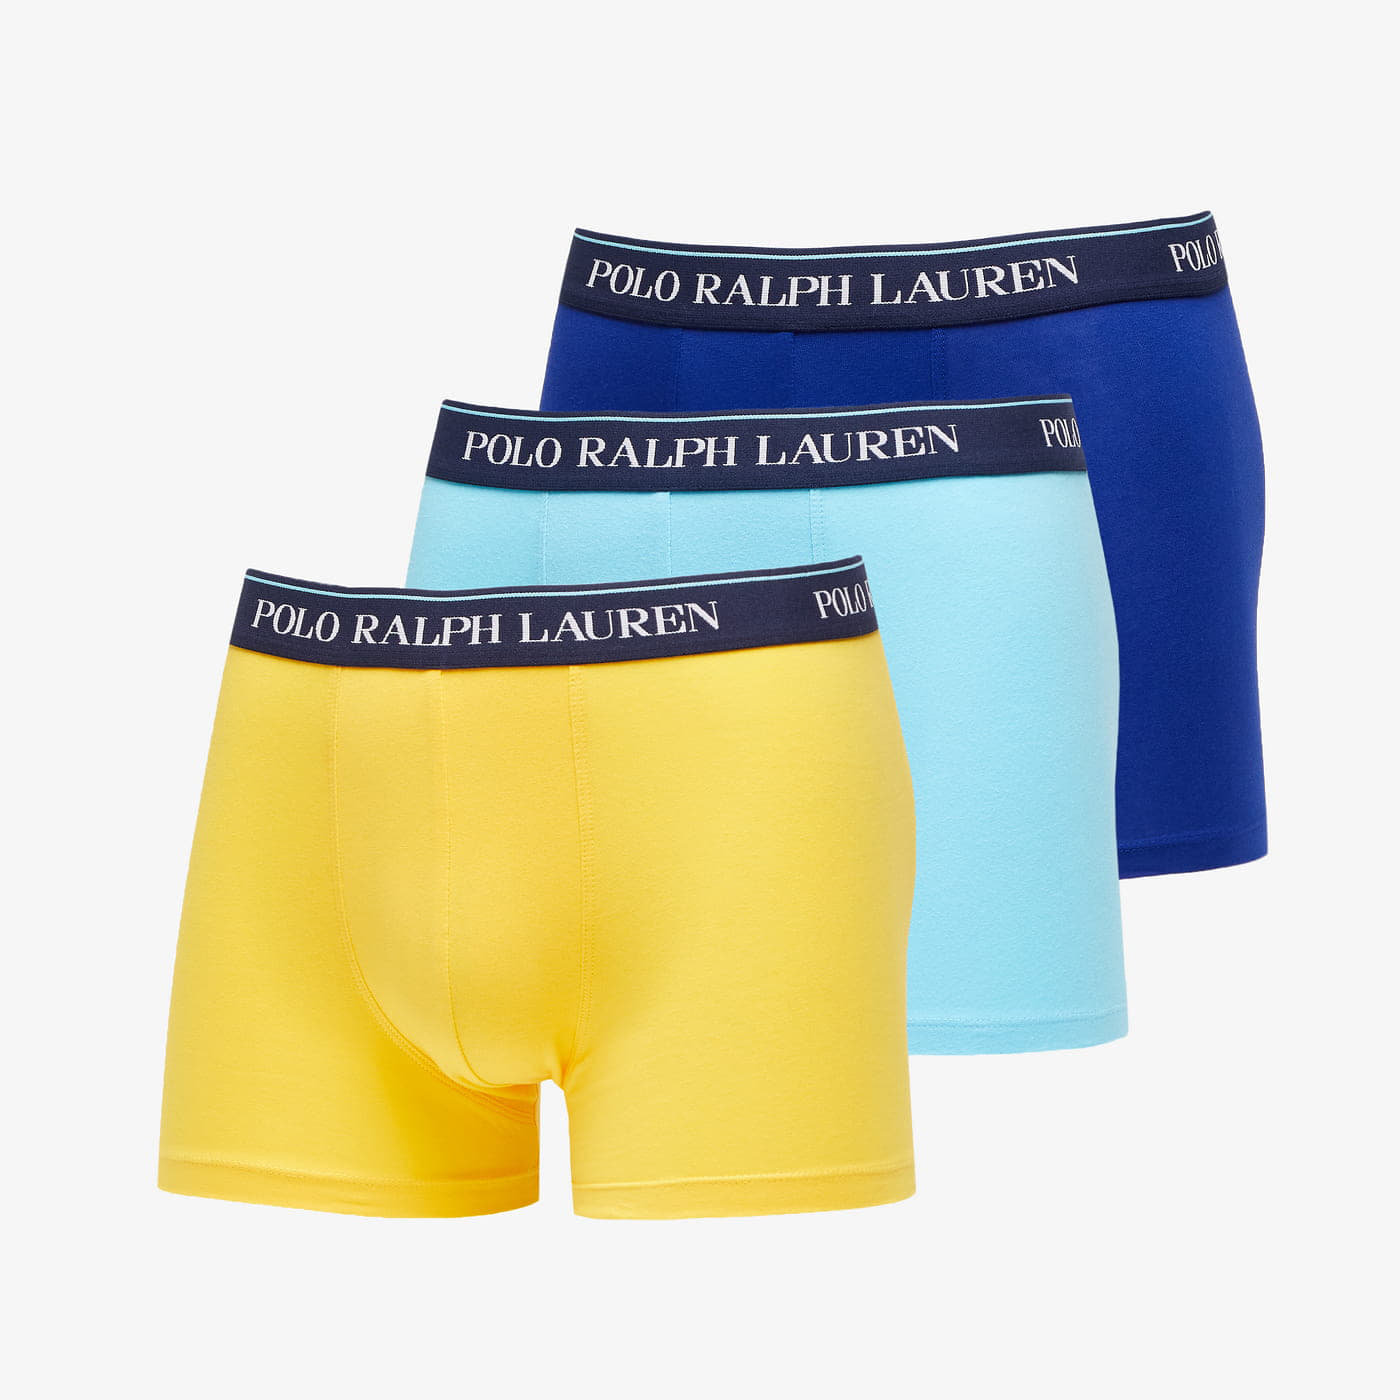 Boxer shorts Polo Ralph Lauren Stretch Cotton Boxer 3-Pack Blue/ Yellow/ Turquoise